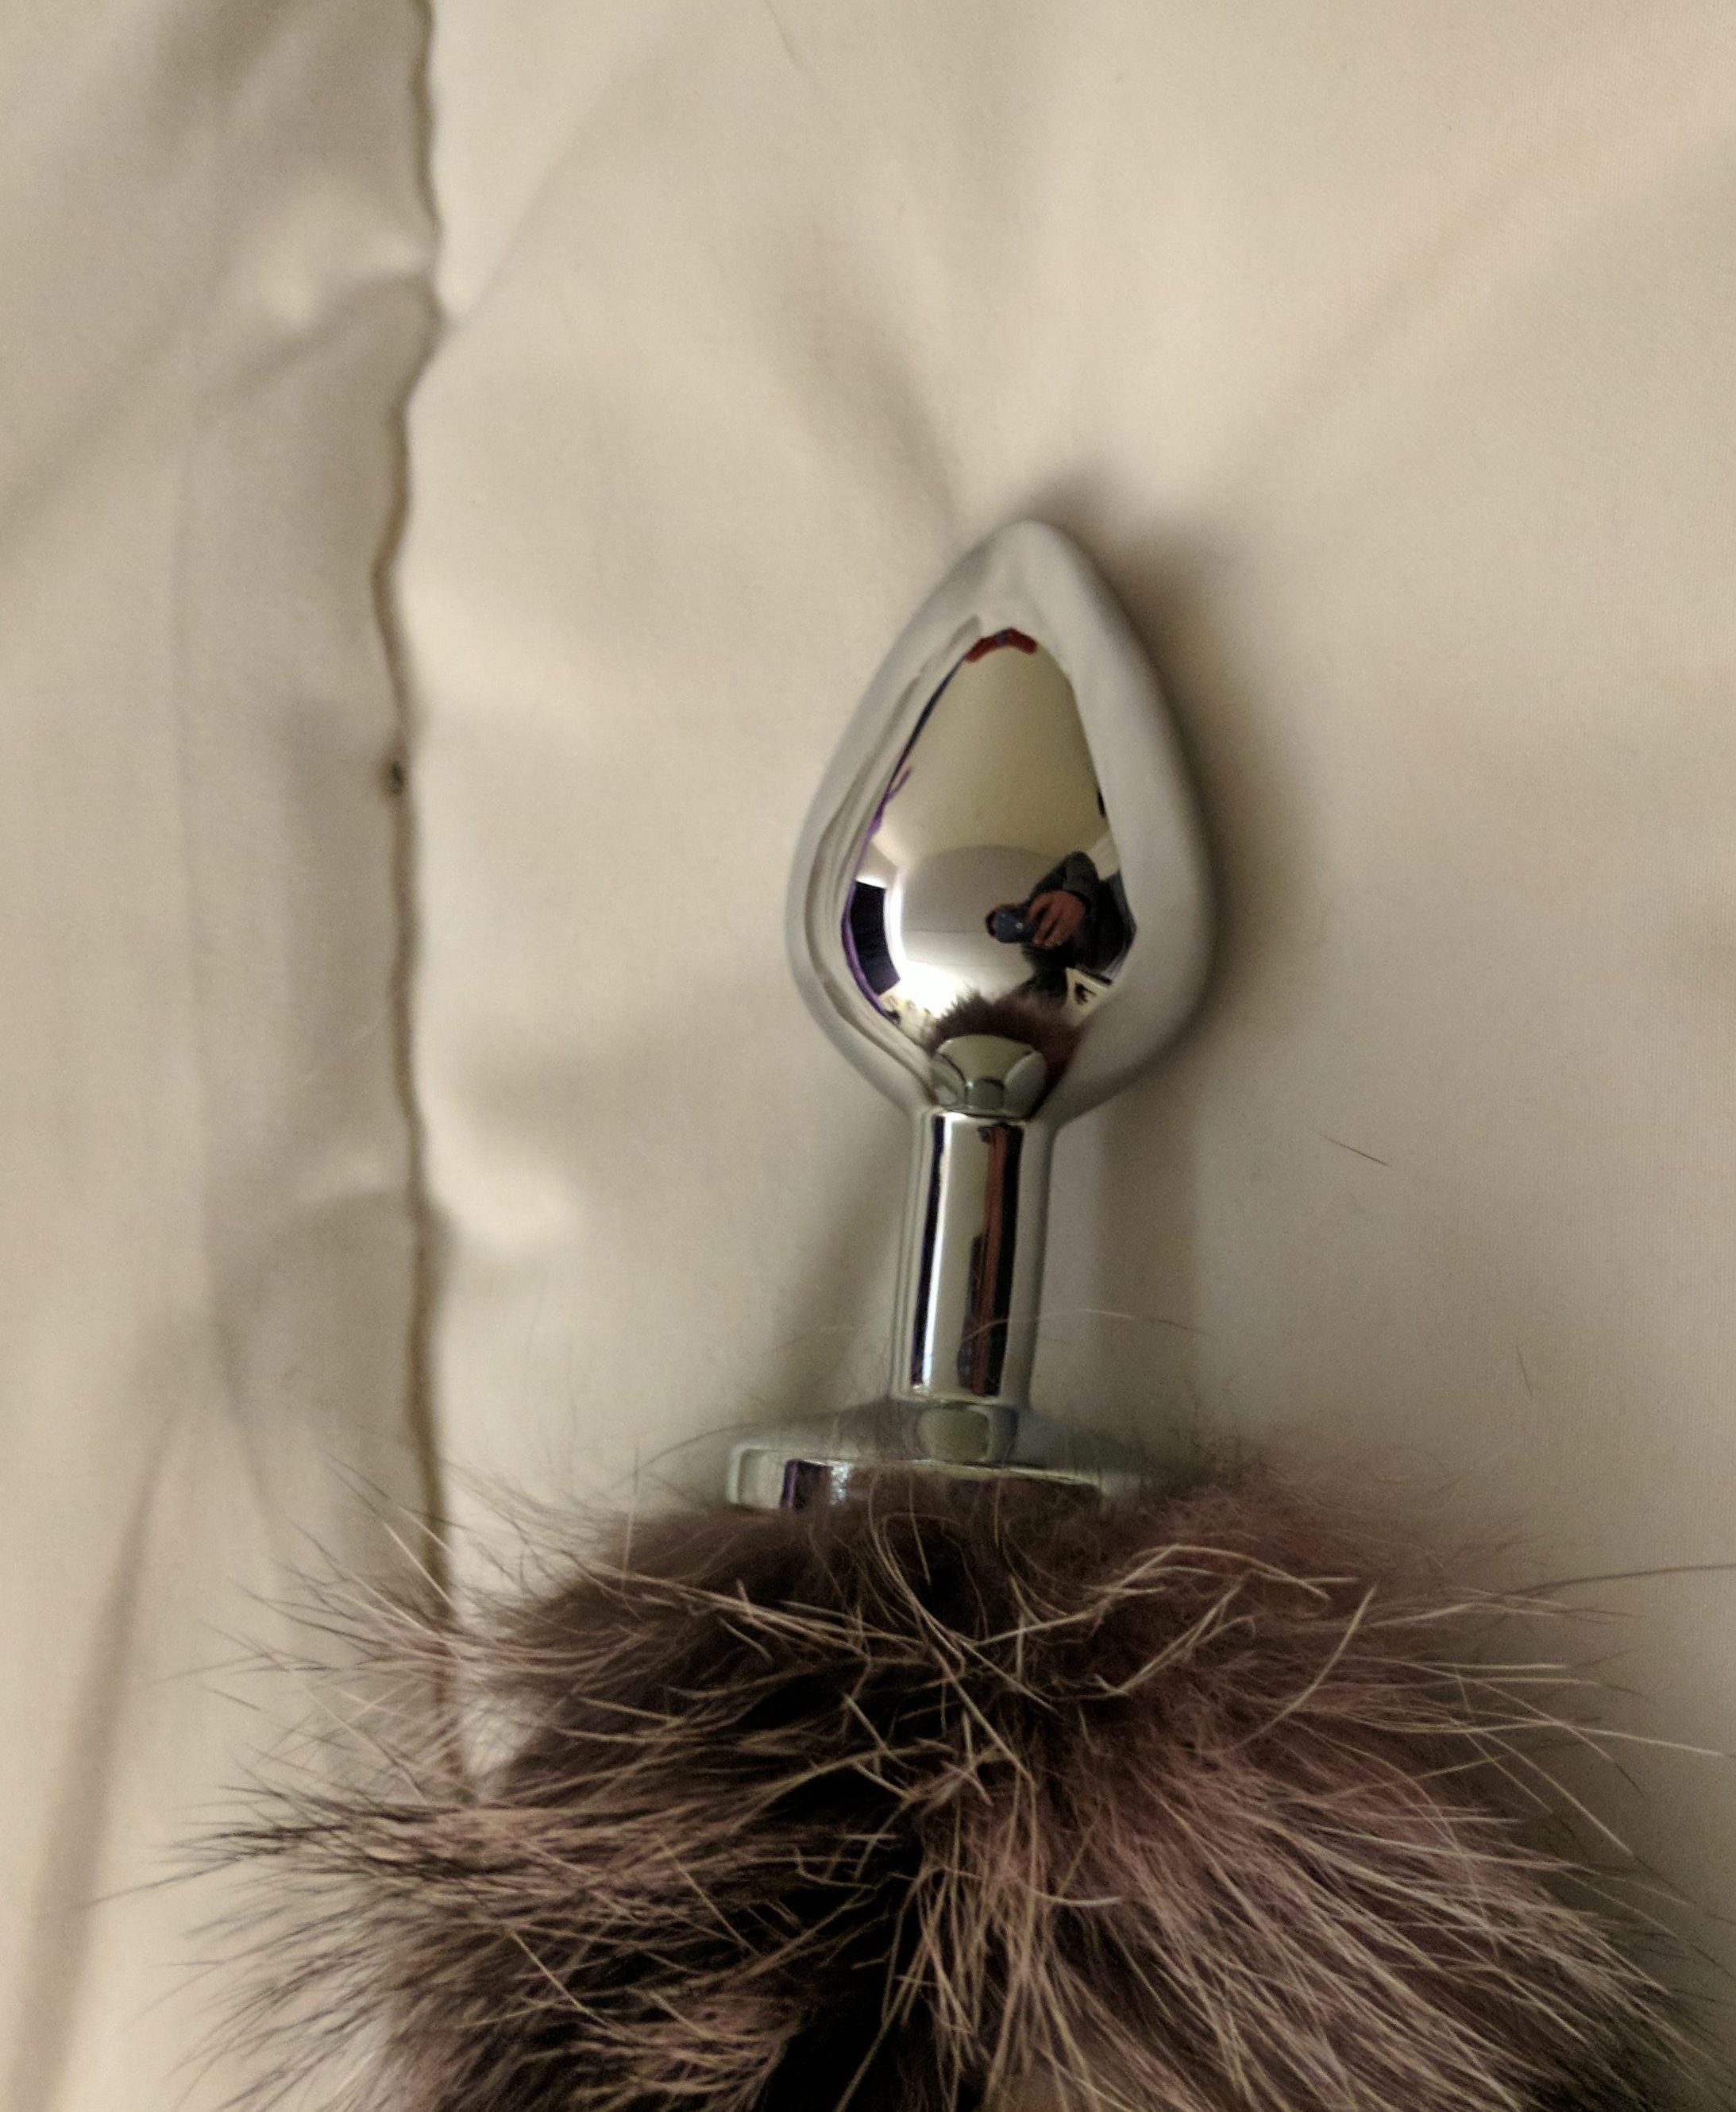 Stainless steel plug end of tail resting on bed